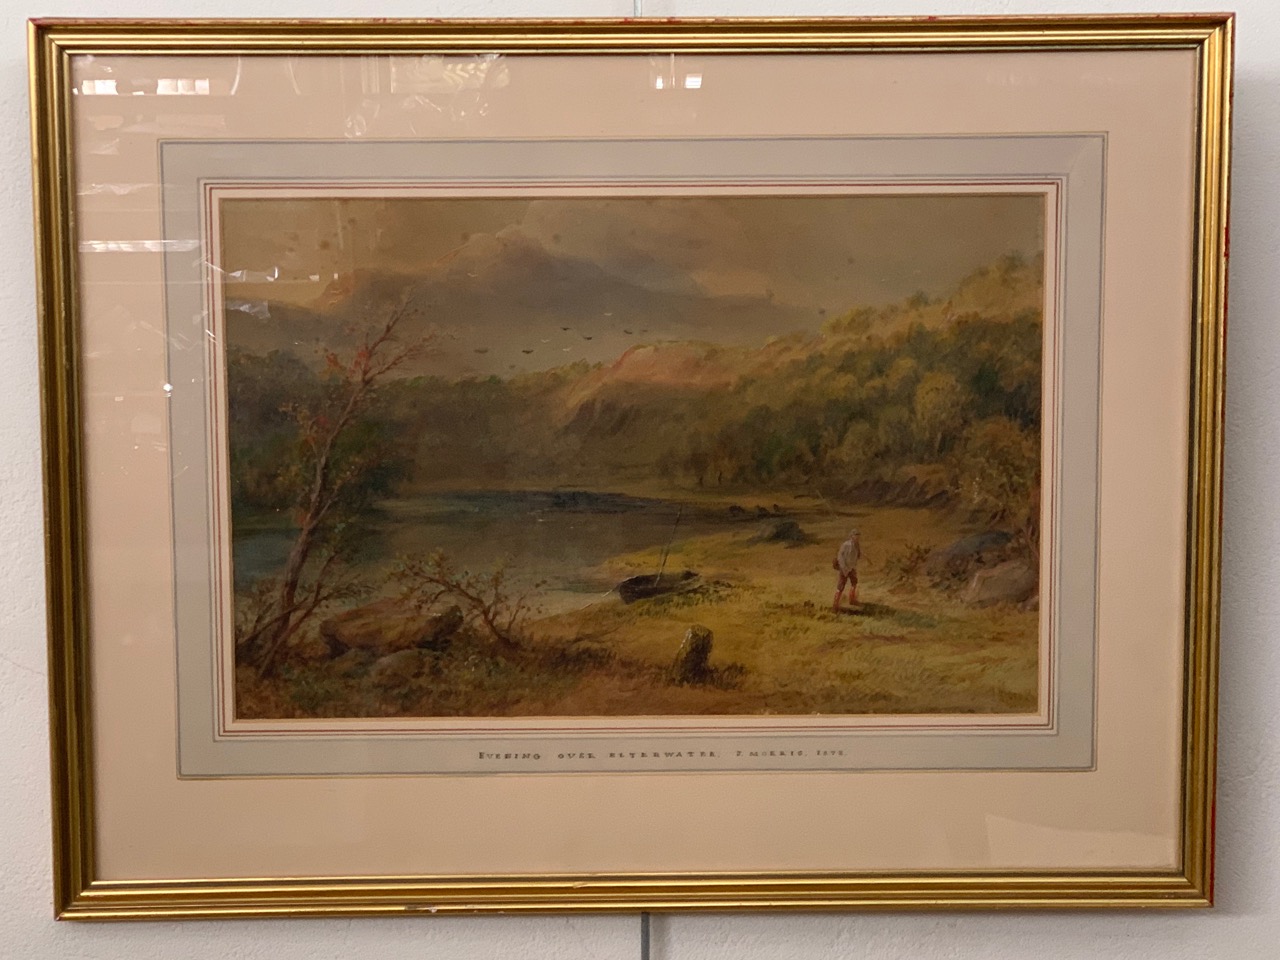 J*** Morris (19th Century), "Evening Over Elterwater", dusk landscape with lone fisherman retreating - Image 2 of 2